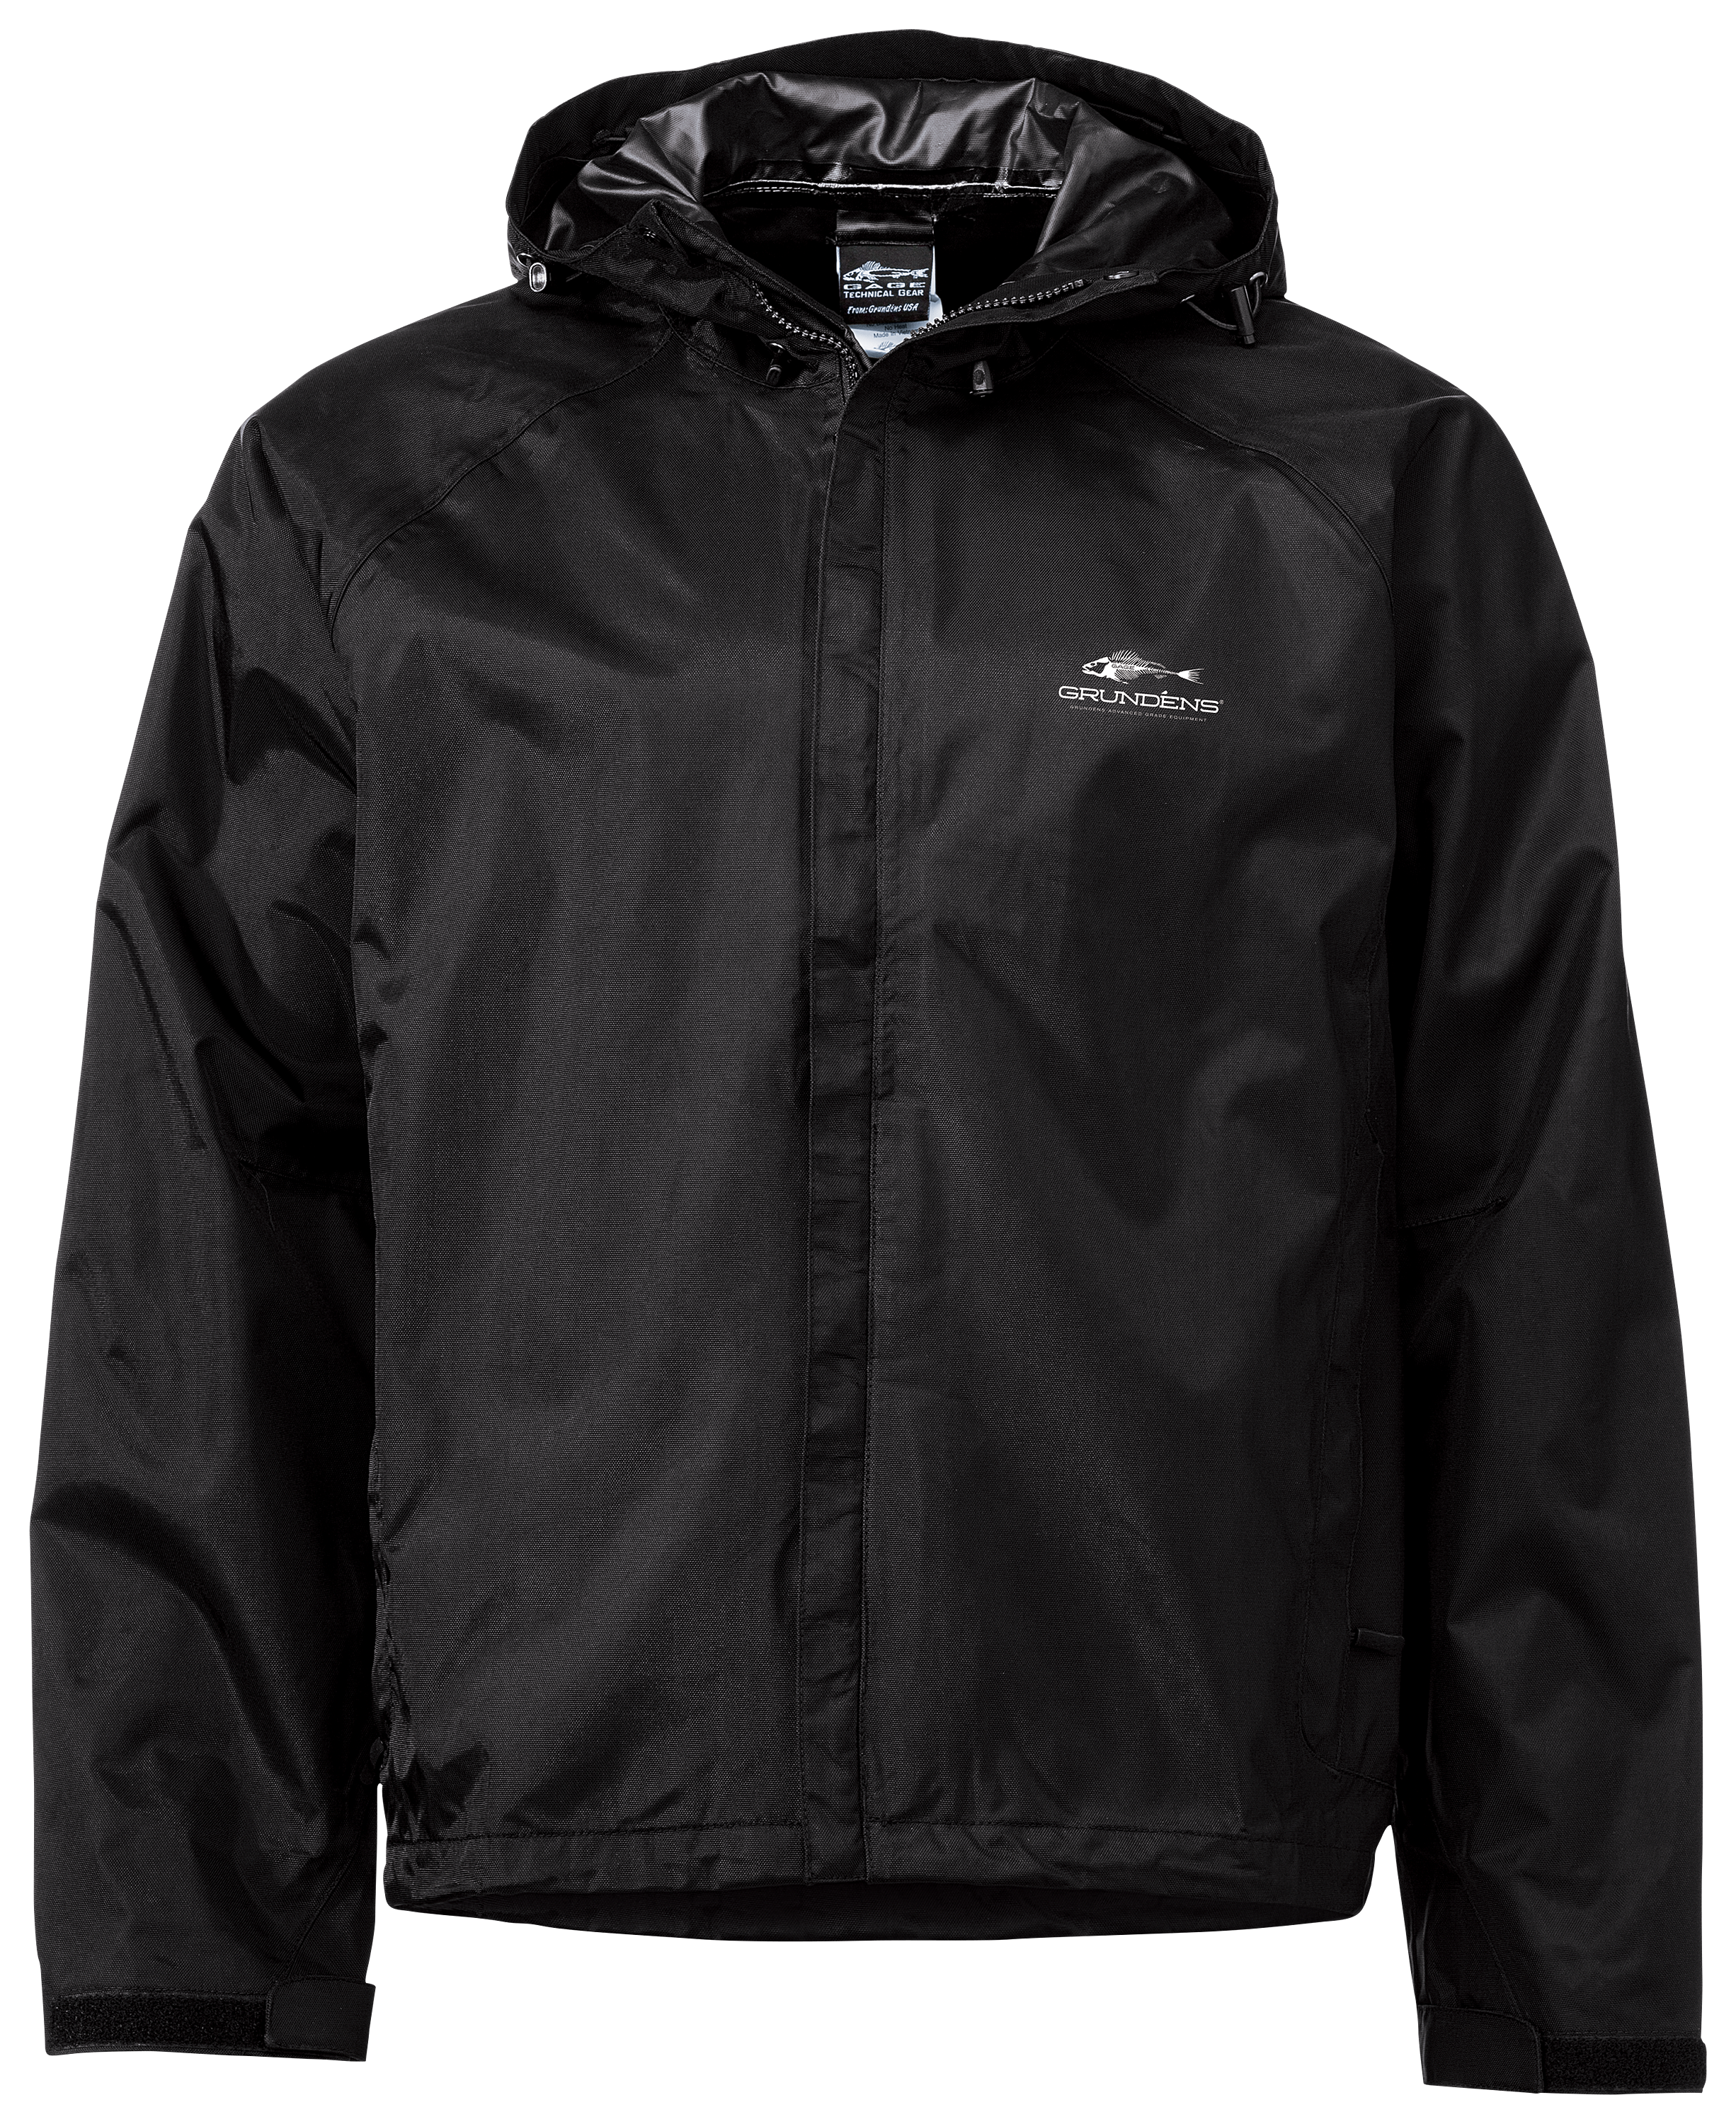 Grundens USA Gage Weather Watch Hooded Rain Jacket for Men